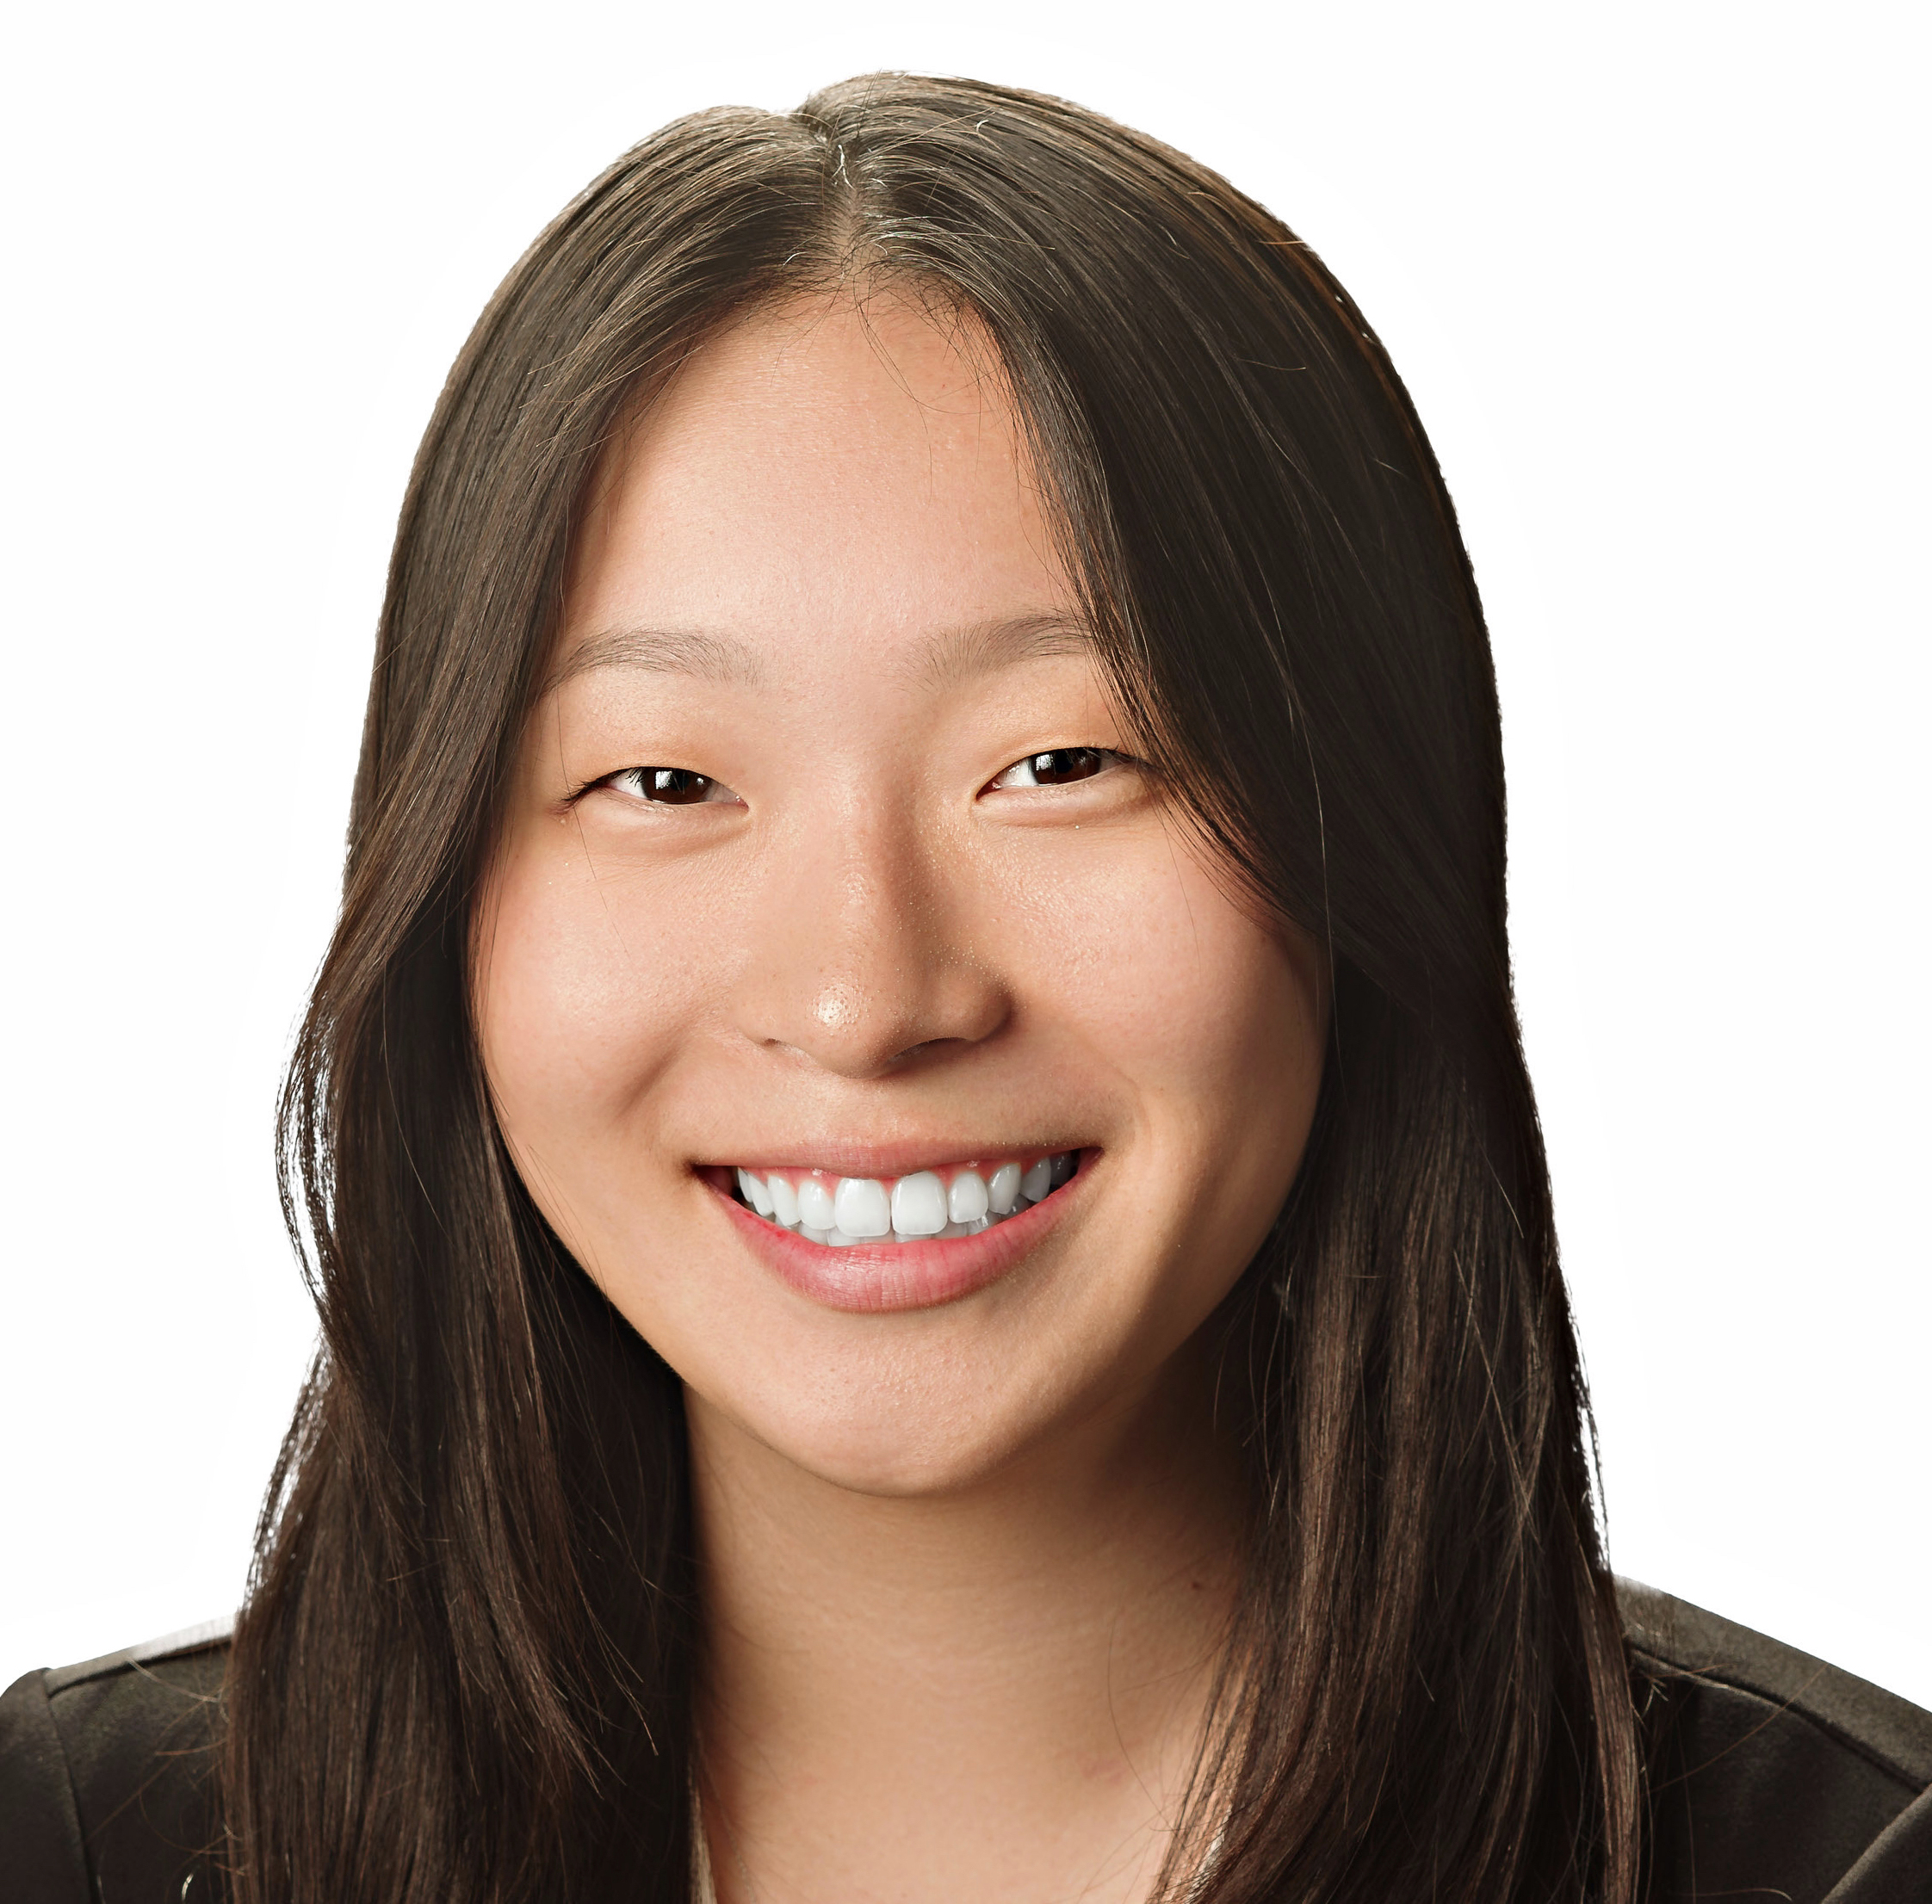 Photo portrait of Alissa Zhang, intern in the Economic Survey Research Center.